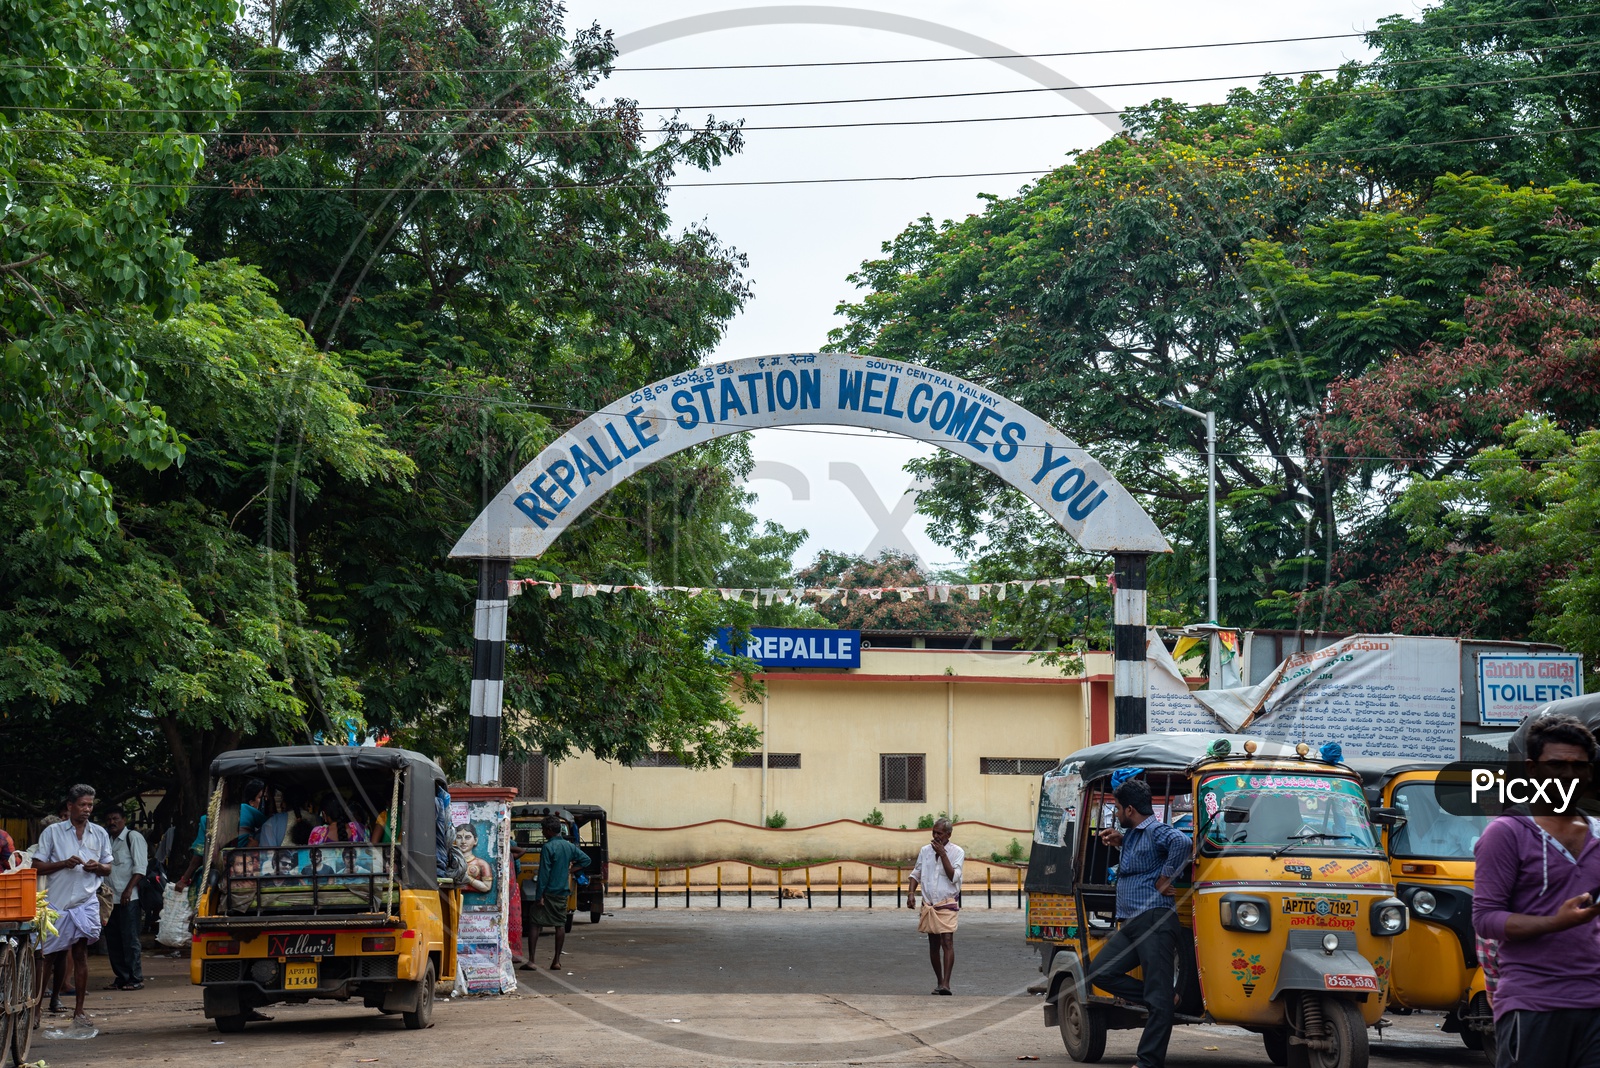 Repalle Railway Station, South Central Railway.